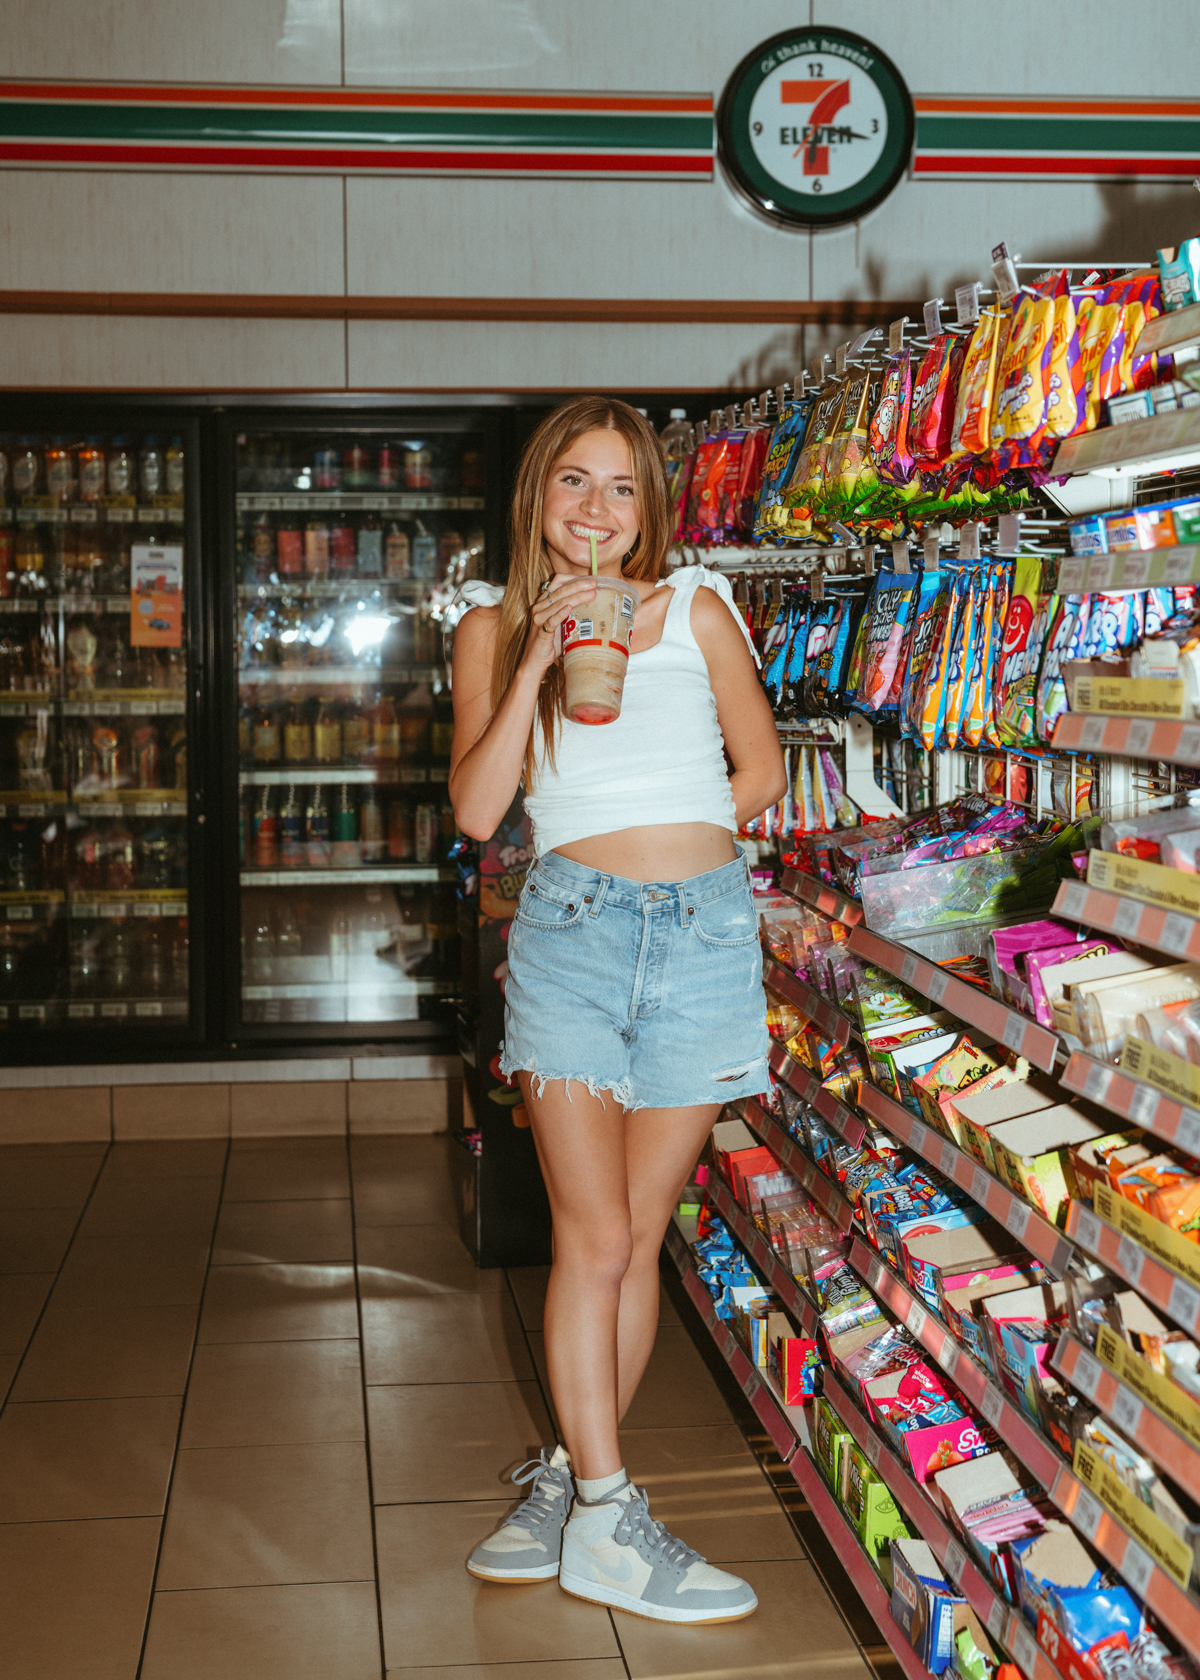 Avery Senior Year an  American Teenage photographed in a convenience store